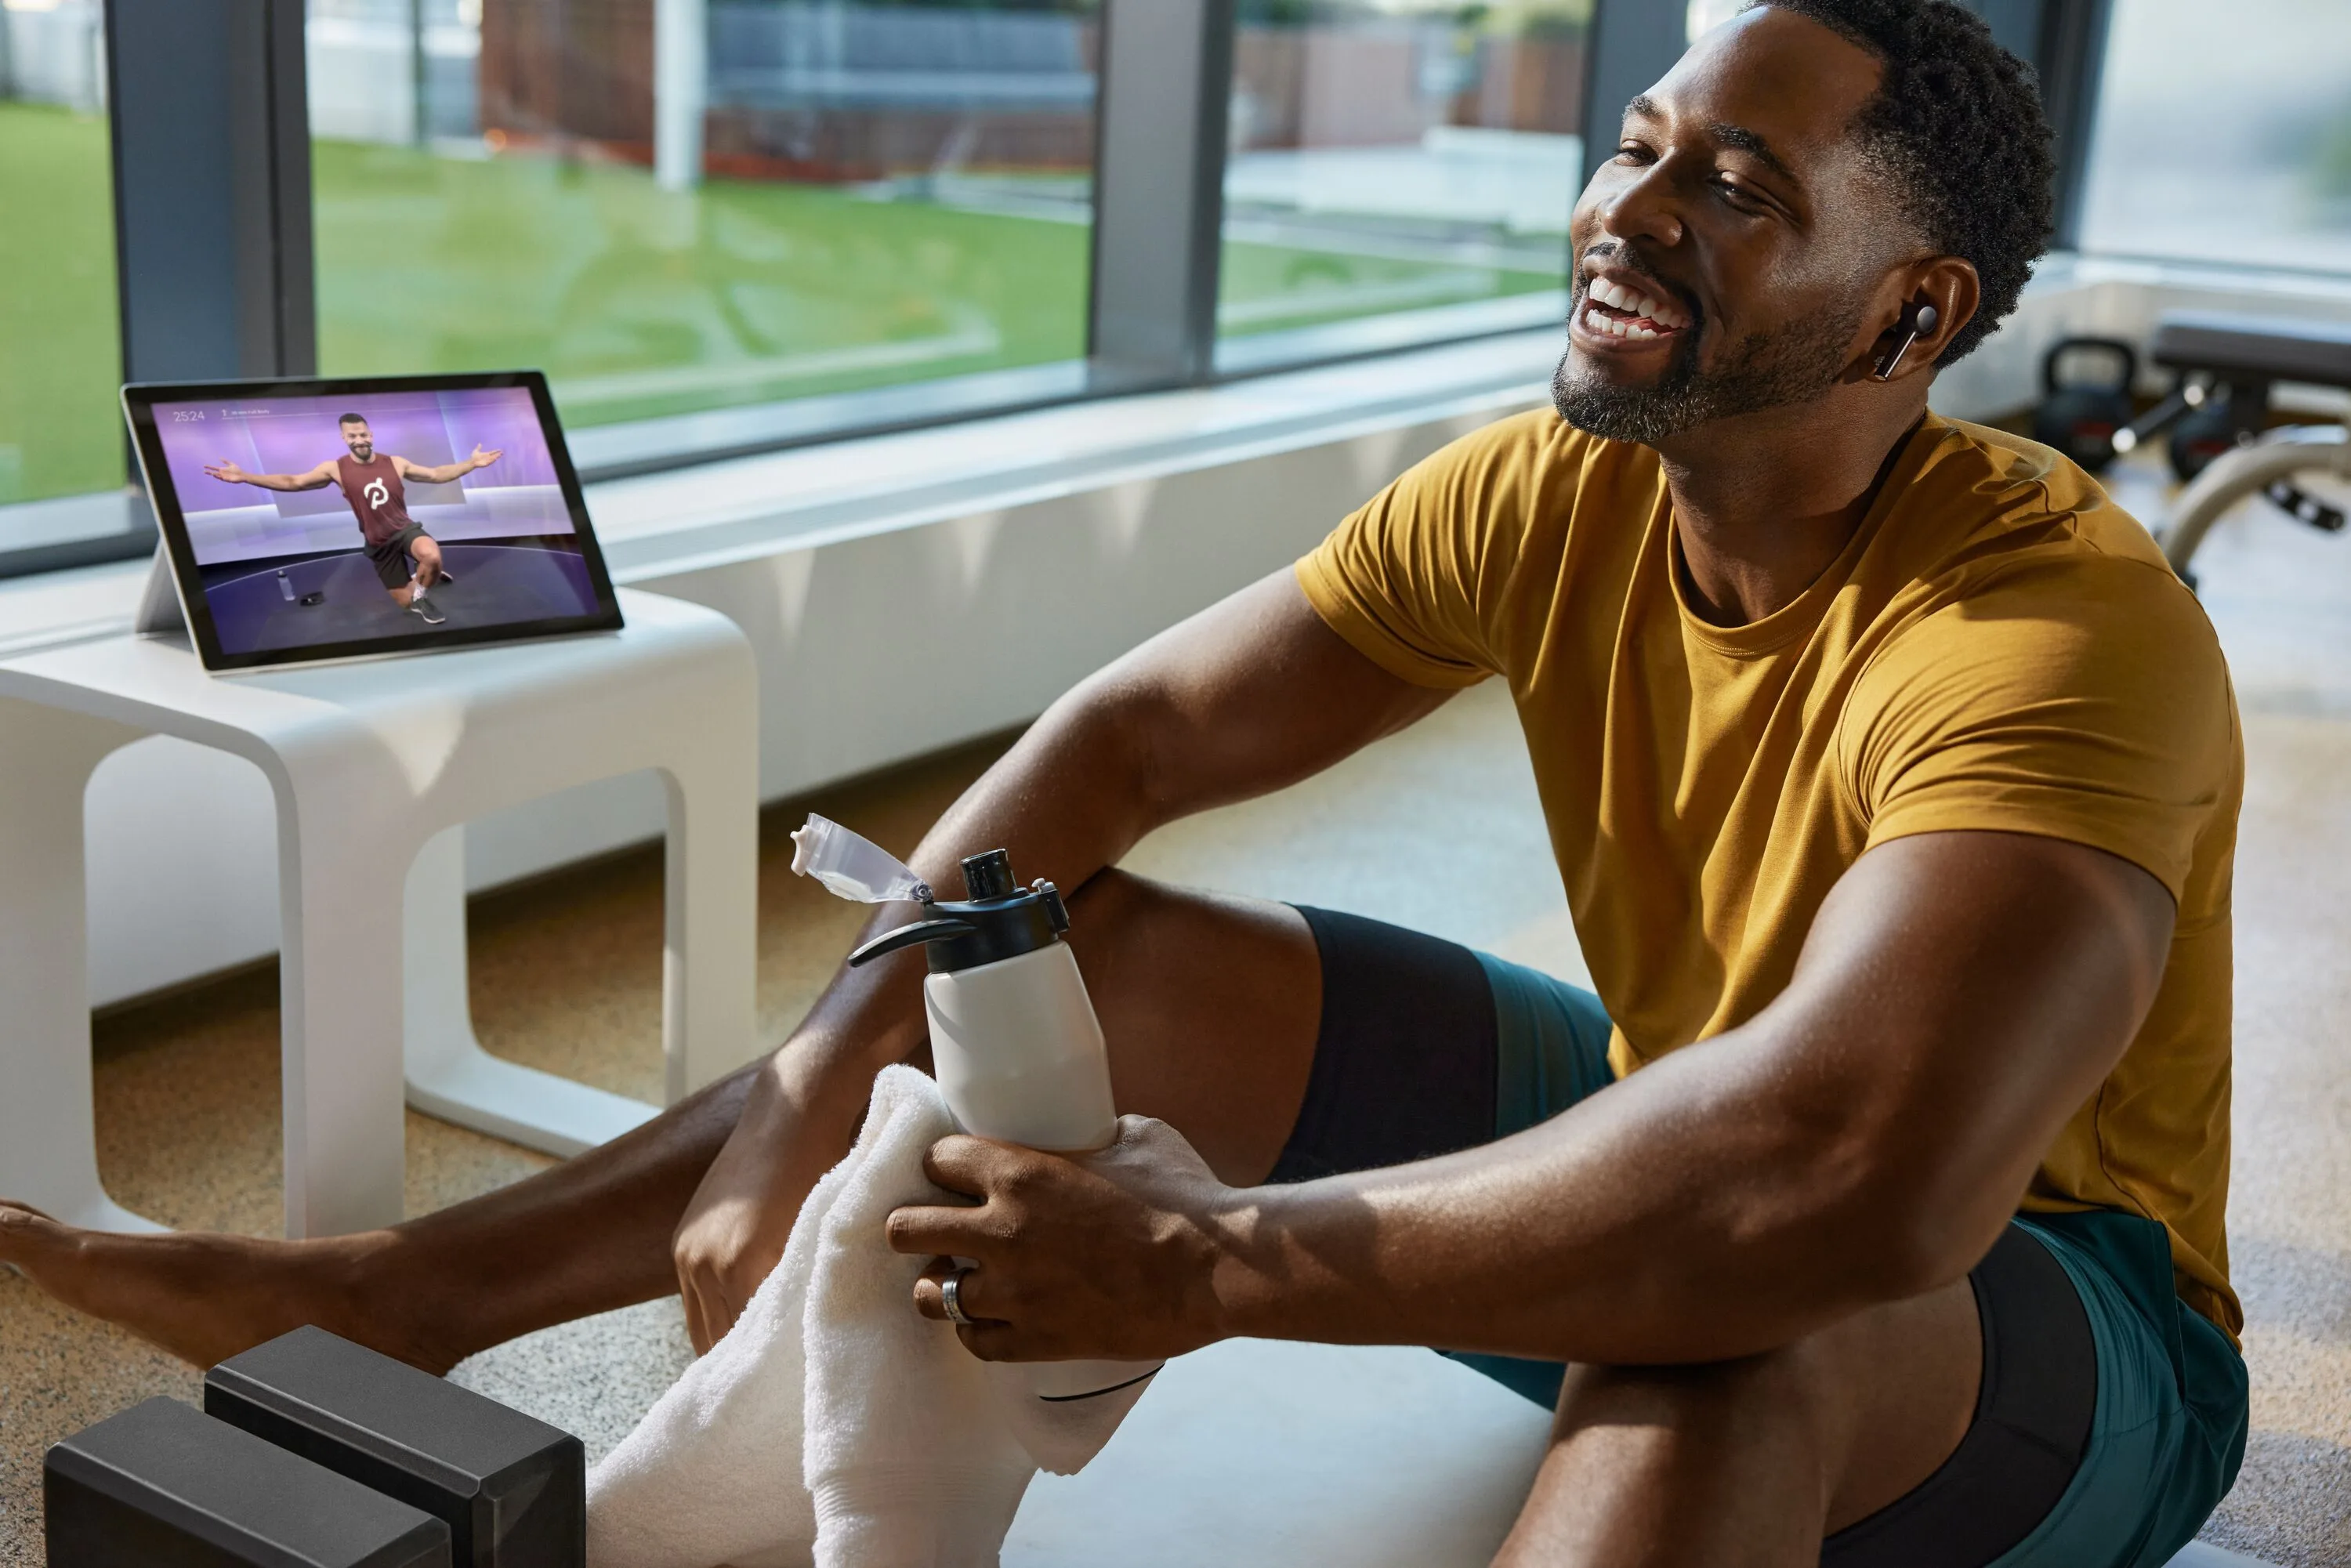 Peloton member using the app while exercising in a gym